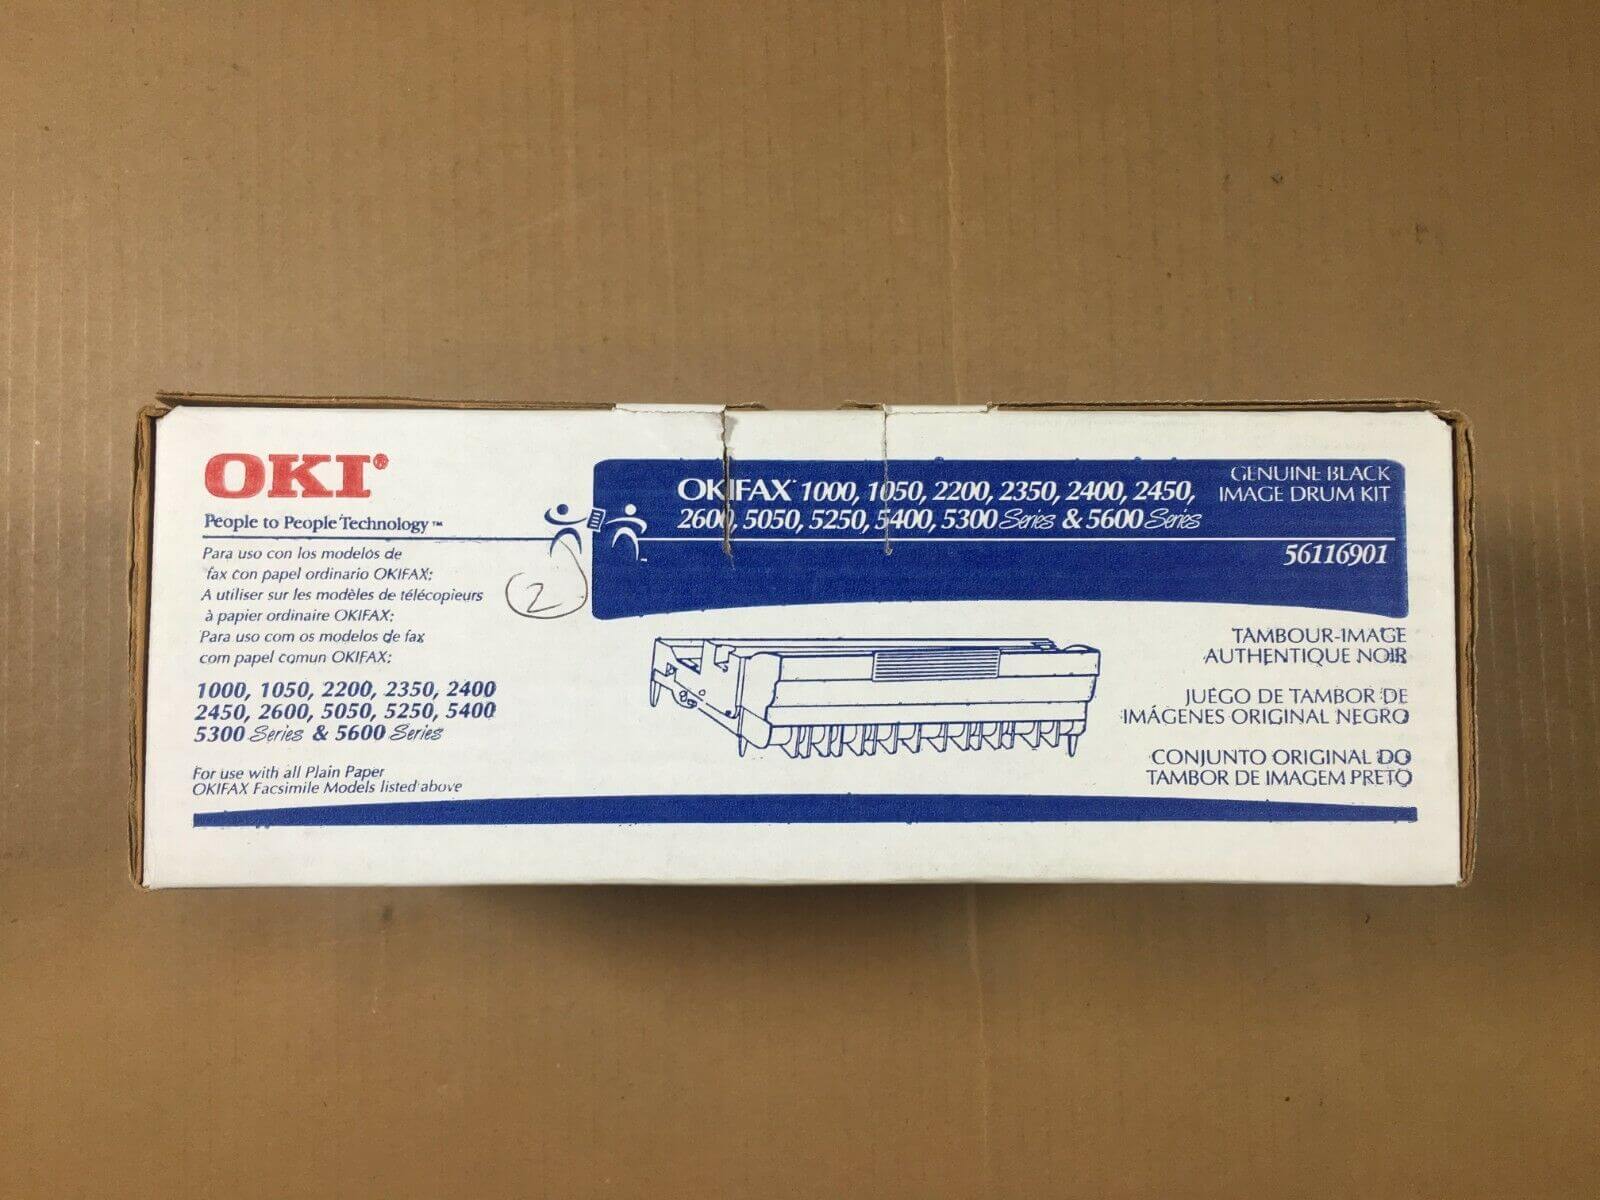 Genuine OKIFAX 1000 1050 2200 Image Drum Kit 56116901 Same Day Shipping - copier-clearance-center